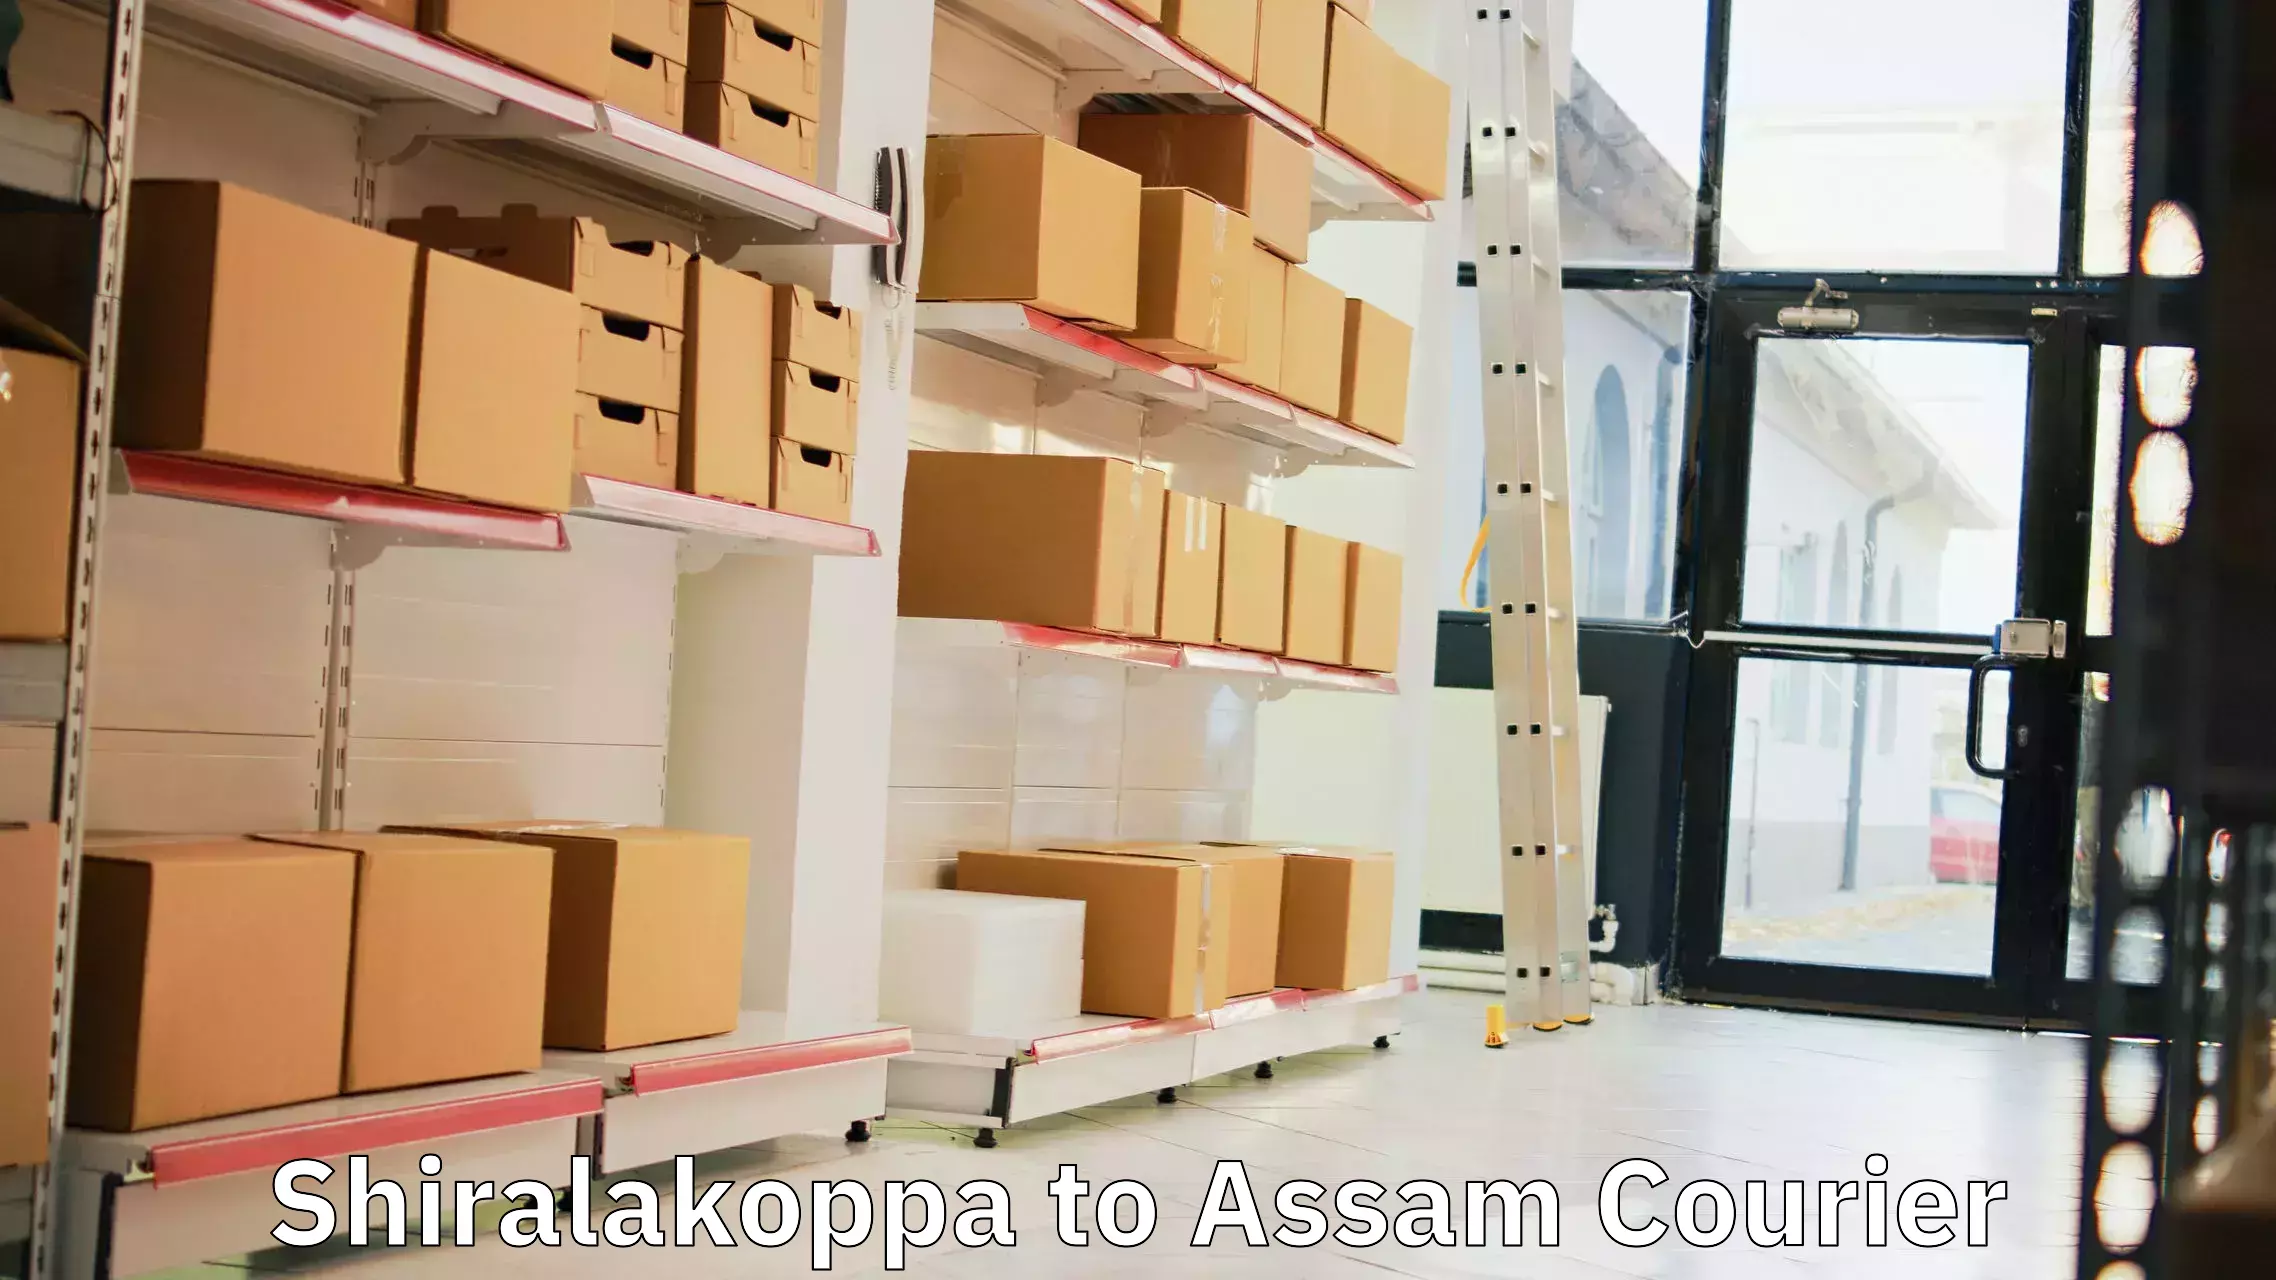 Local courier options Shiralakoppa to Lala Assam